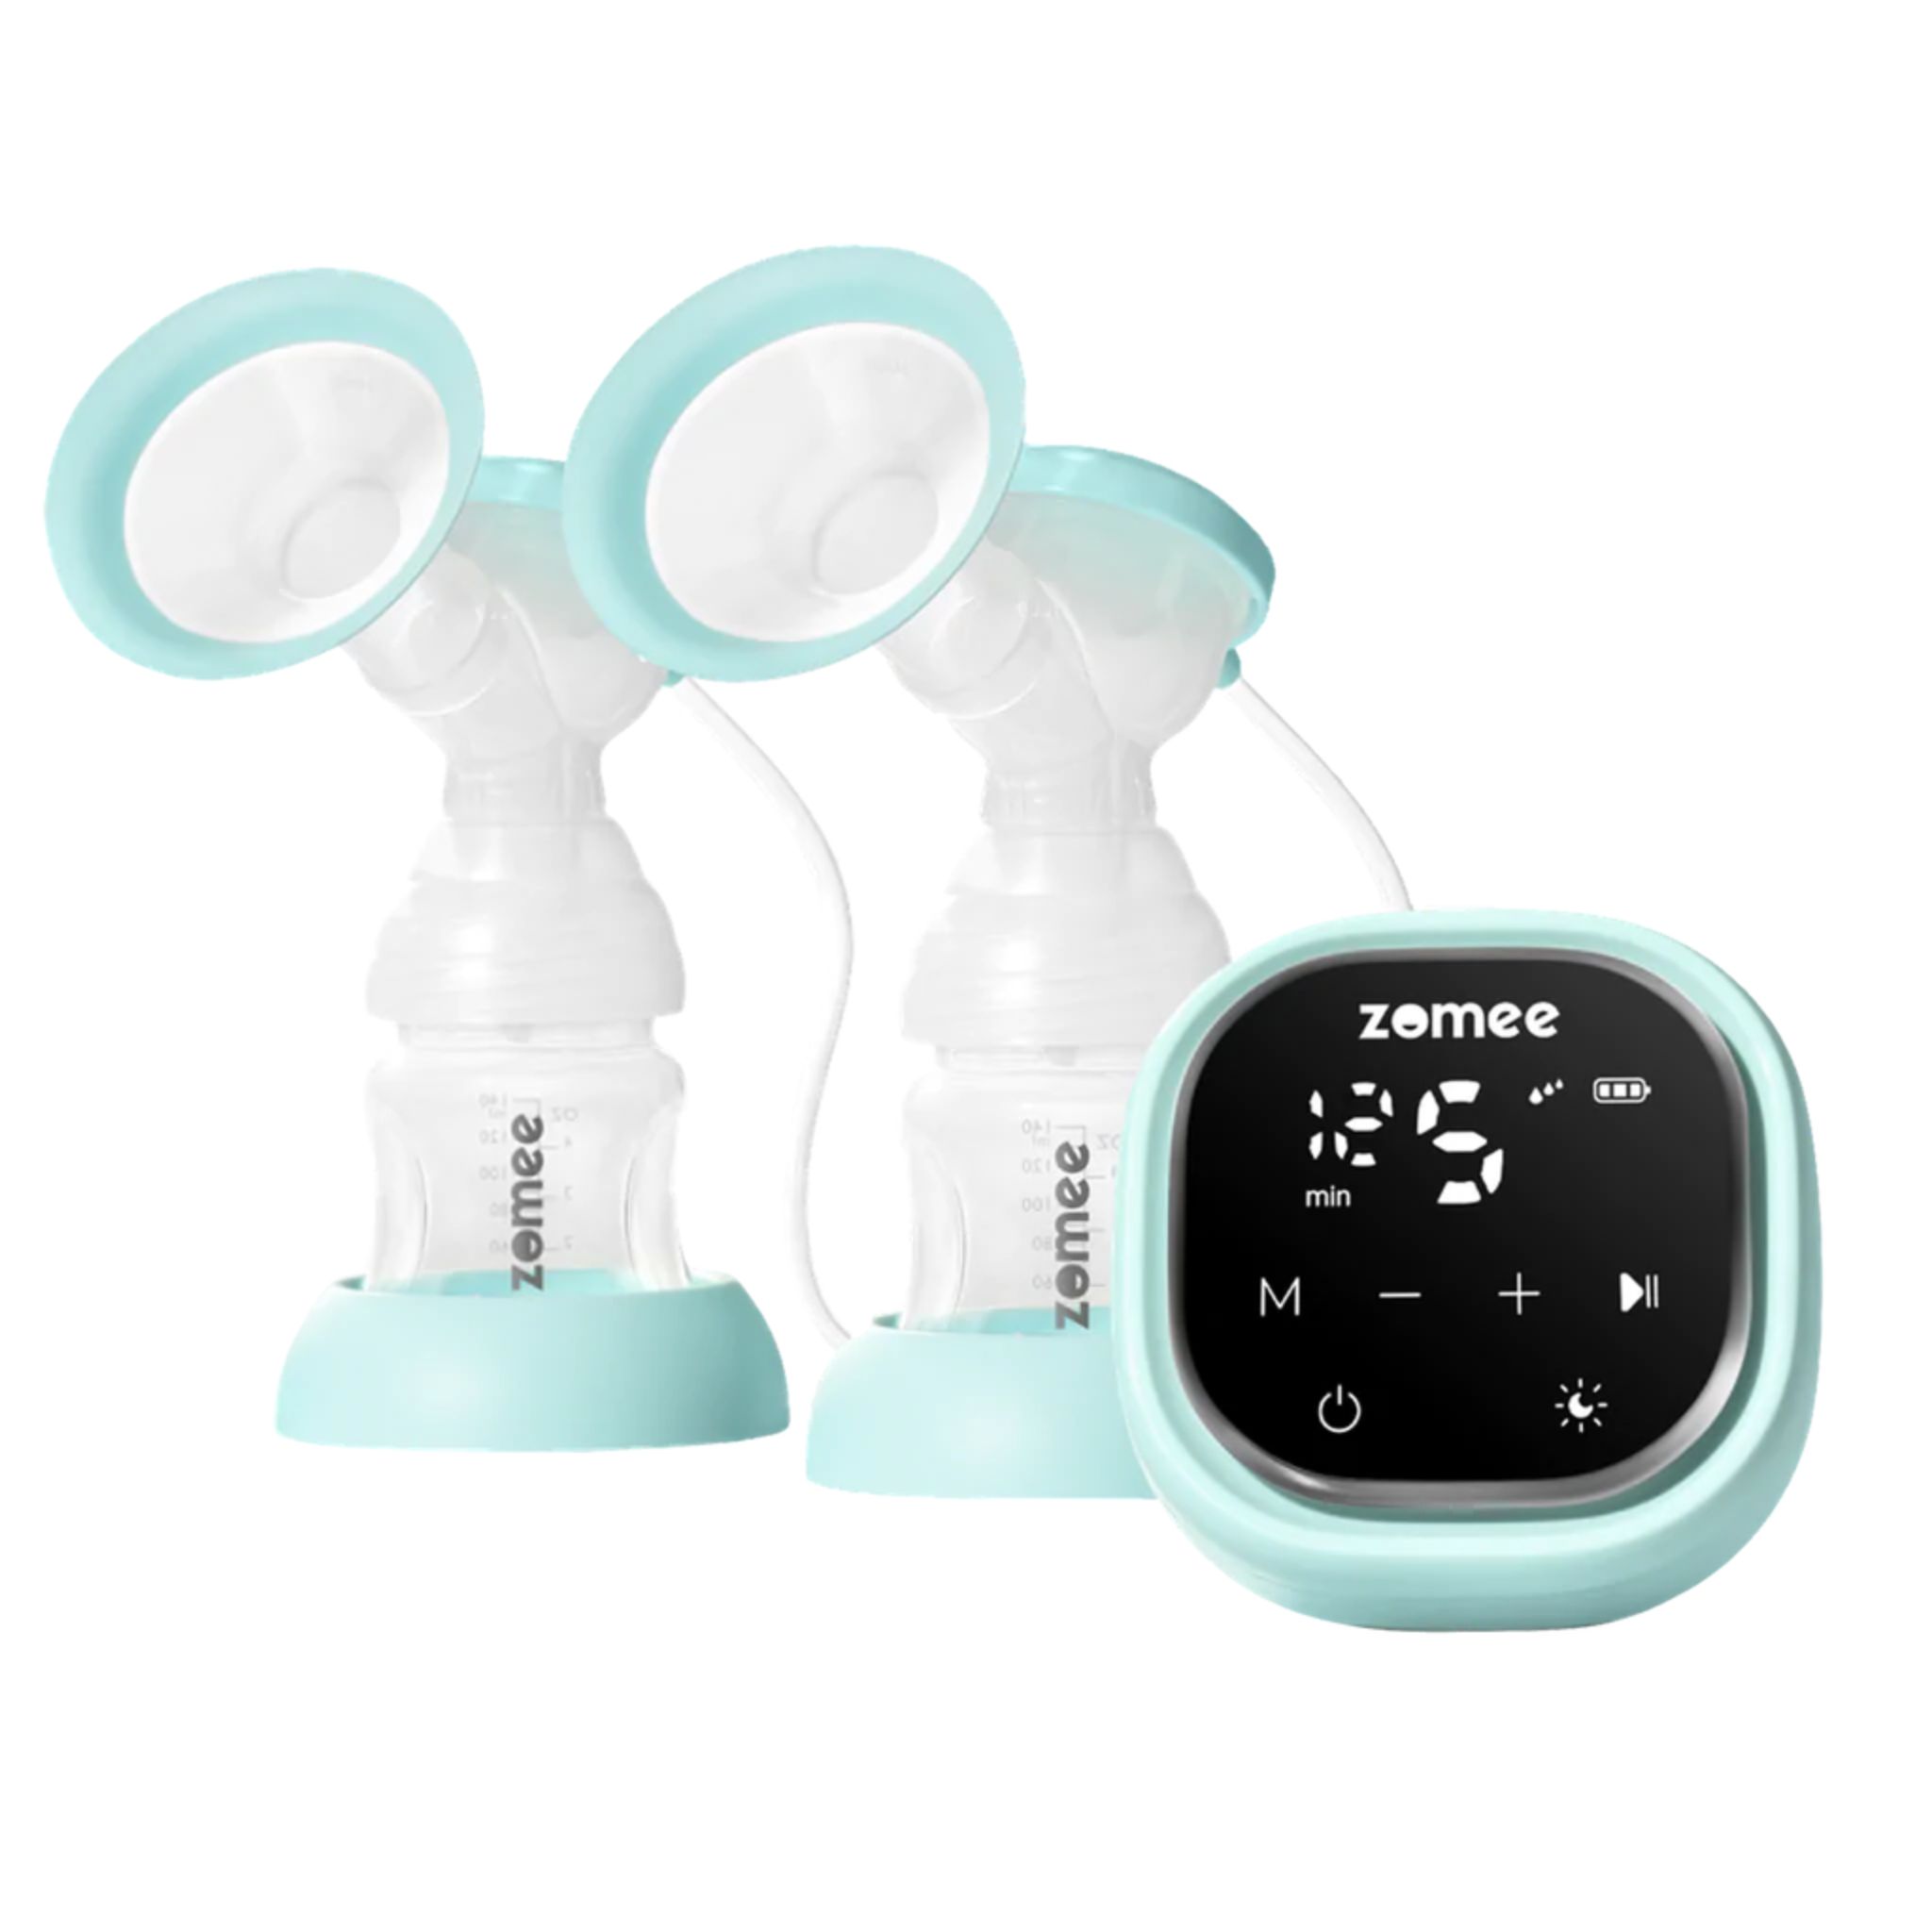 Motif Luna Breast Pump: A Pumping Mom's Review - The Pumping Mommy